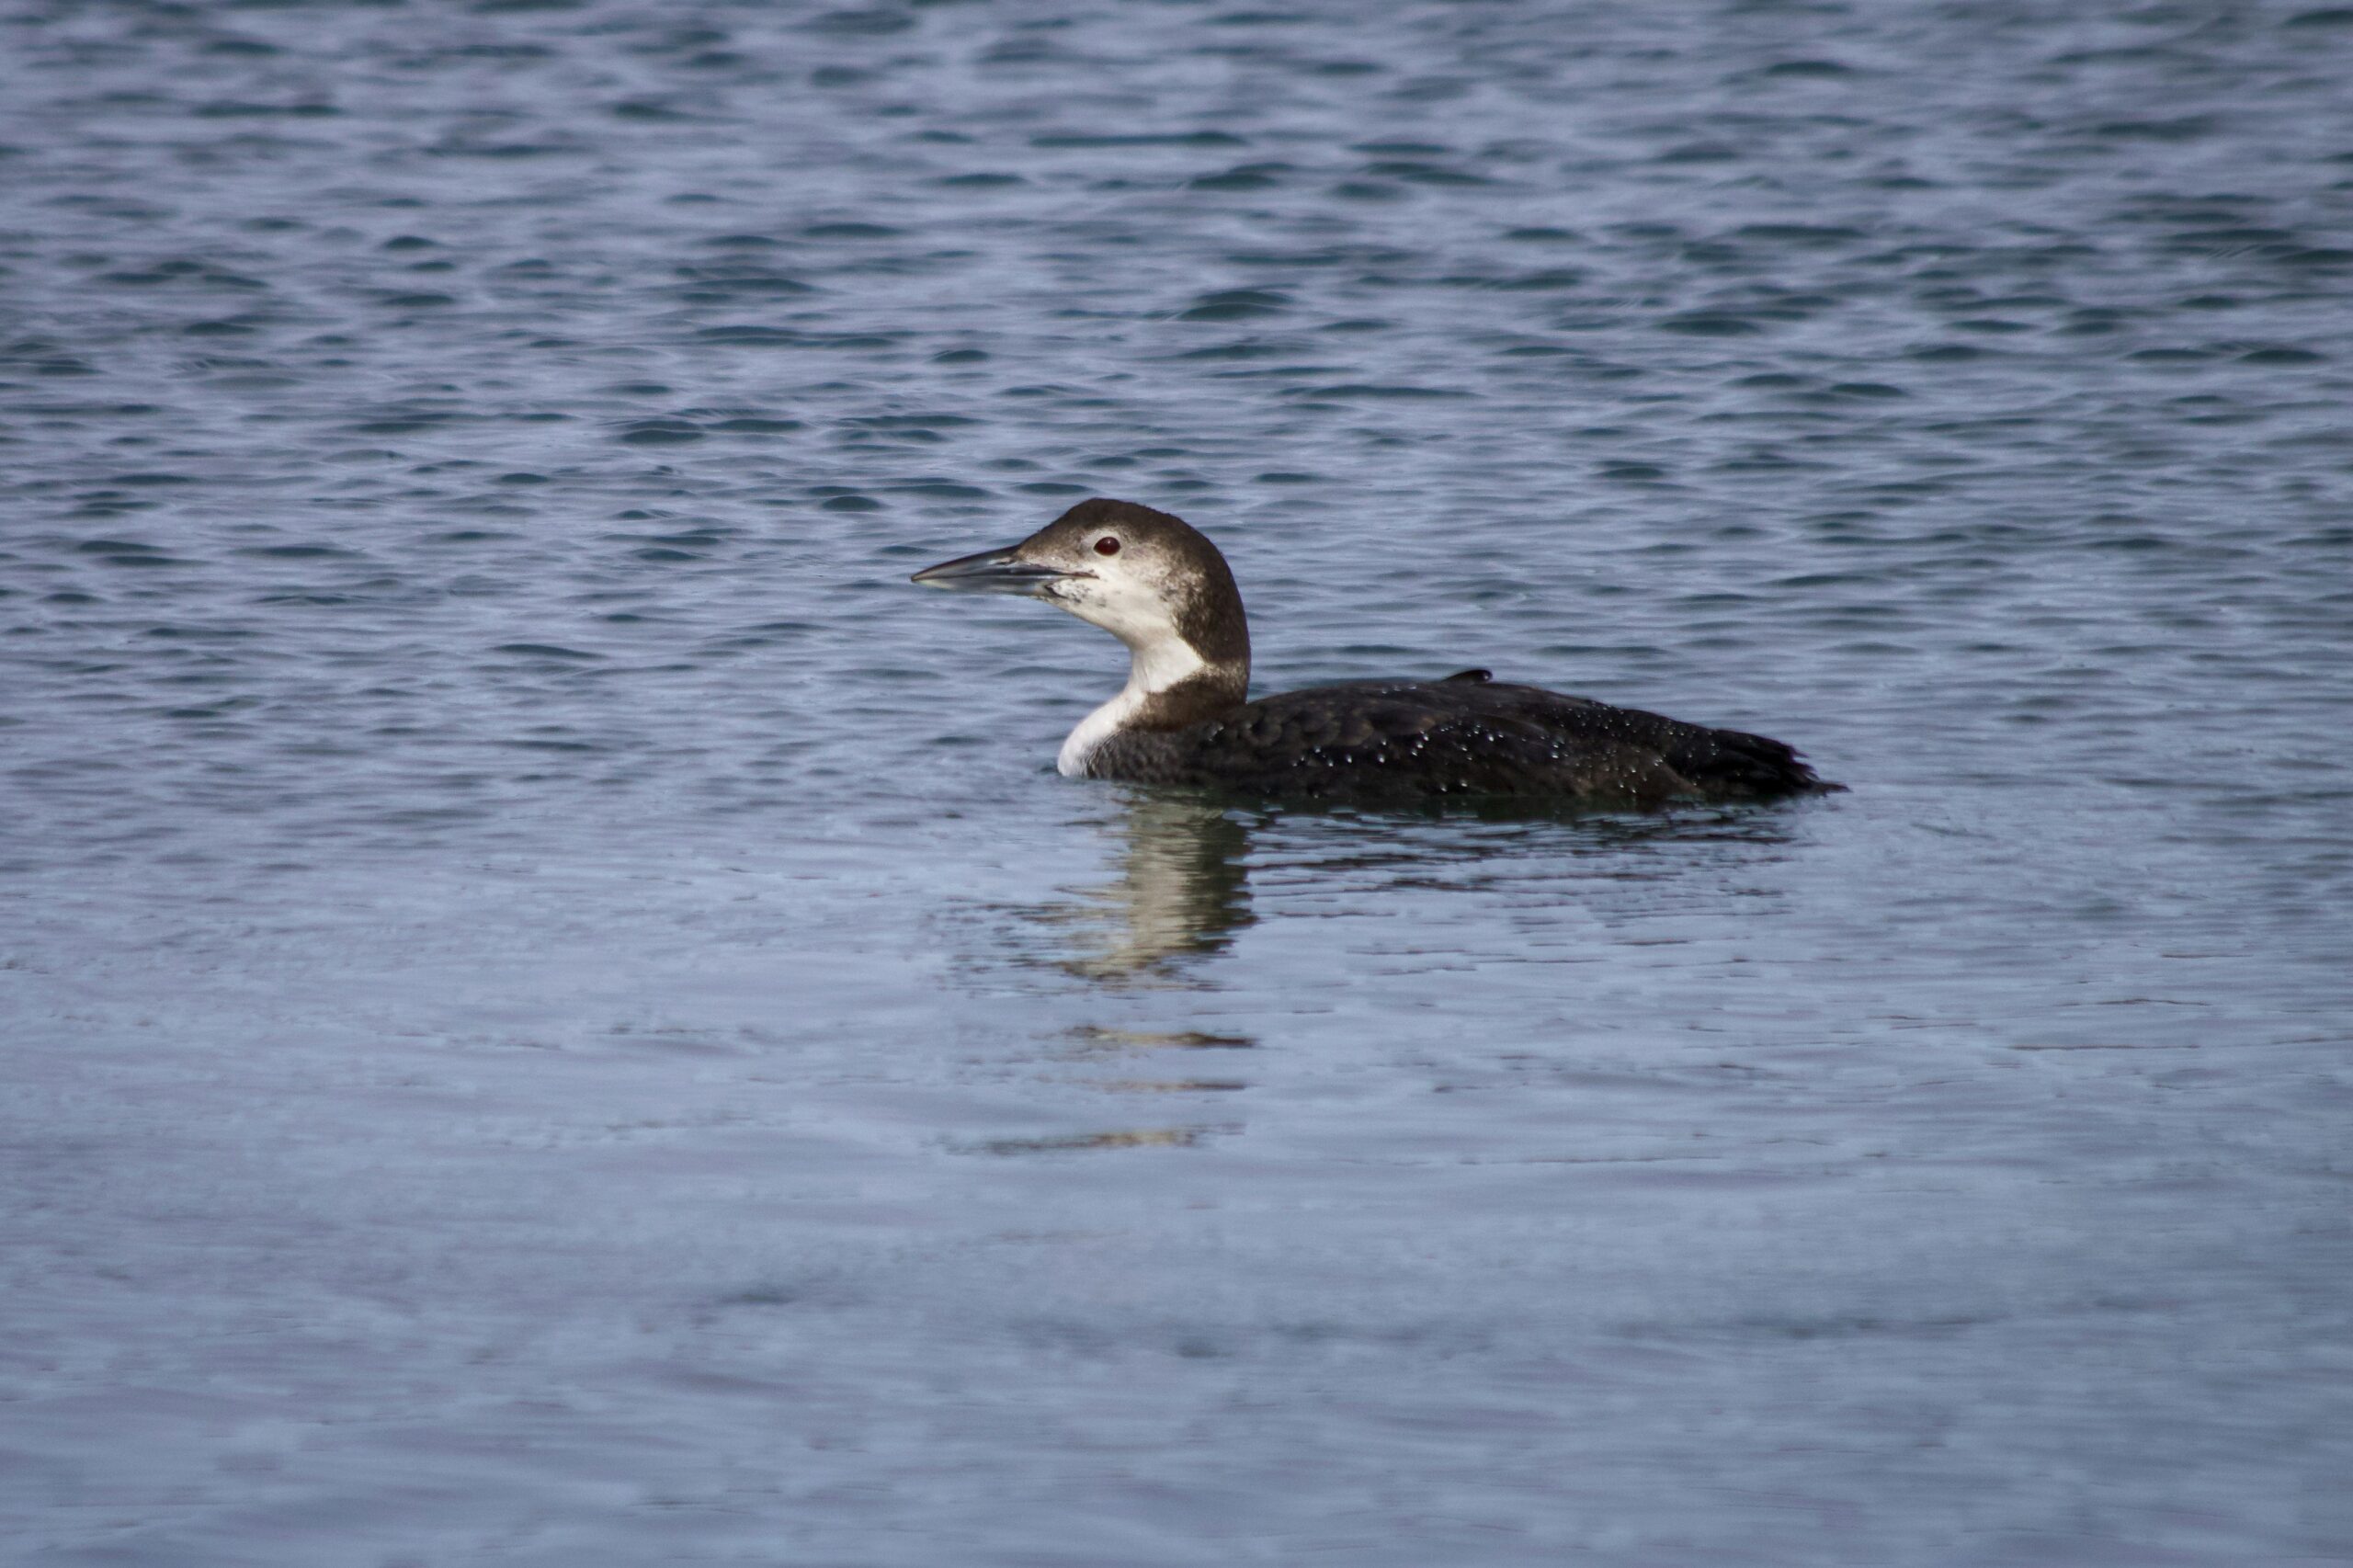 A Common Loon in winter plumage. Photo by Brian Yurasits on Unsplash